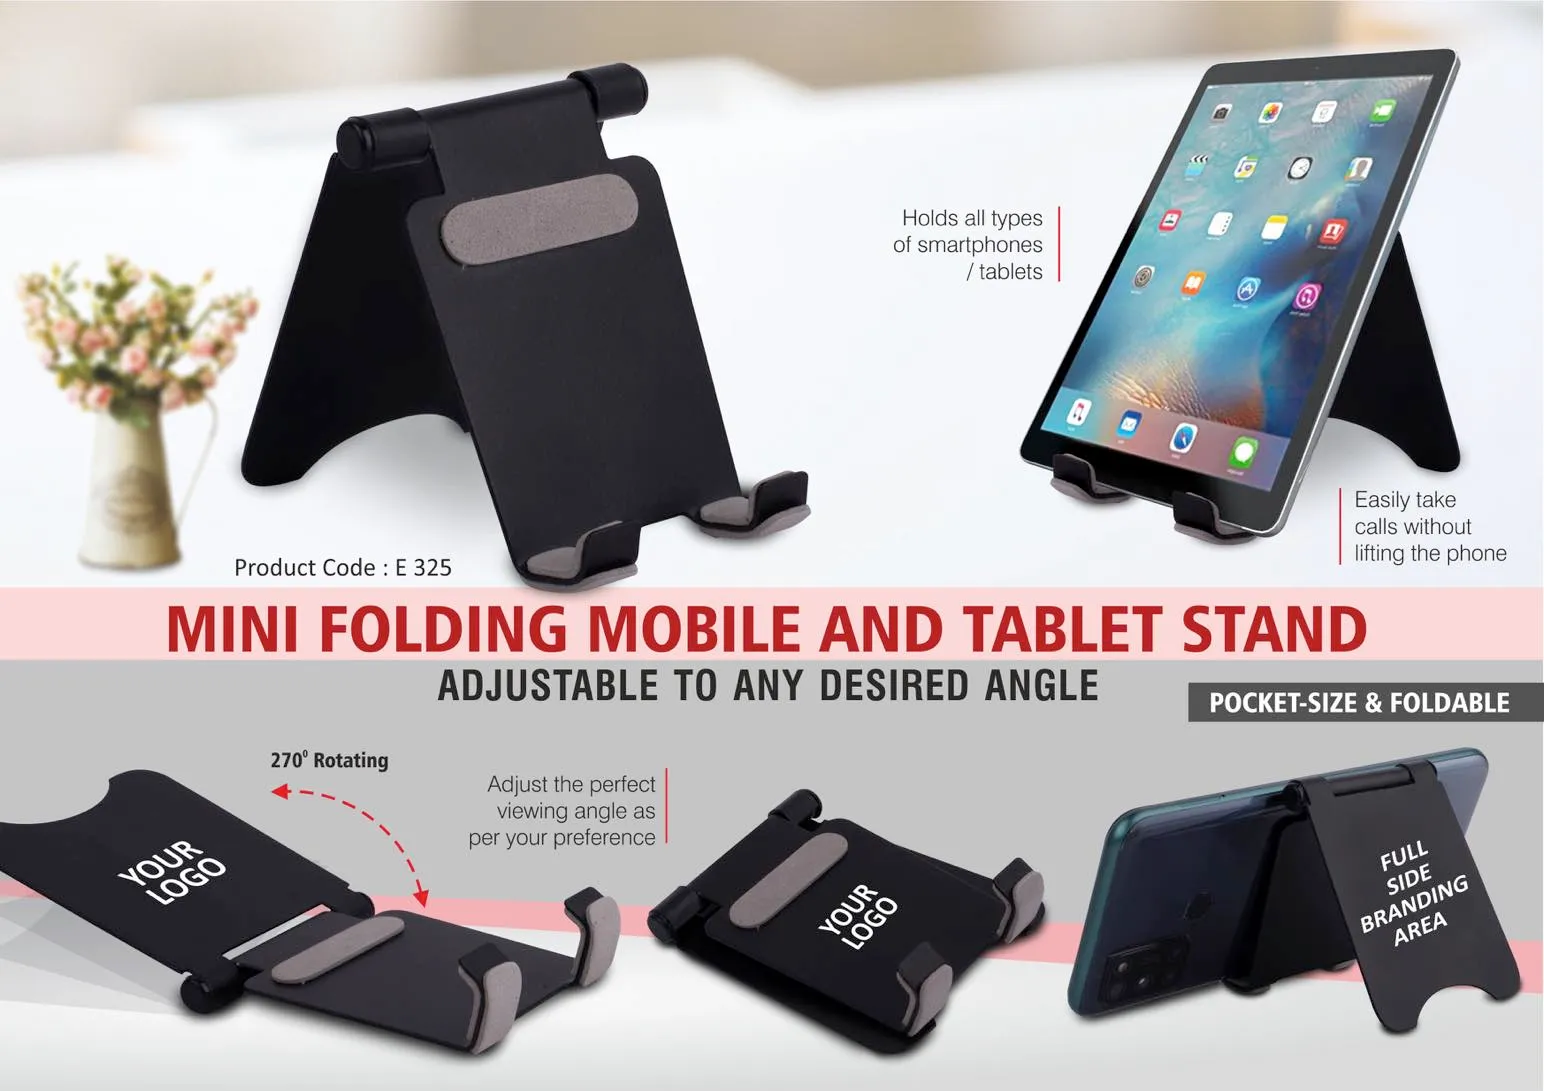 Planet Office Mobile and Tablet Stand, Anti-skid Pads to Guard Against Slips, Adjustable up to 270 Degrees, E 325